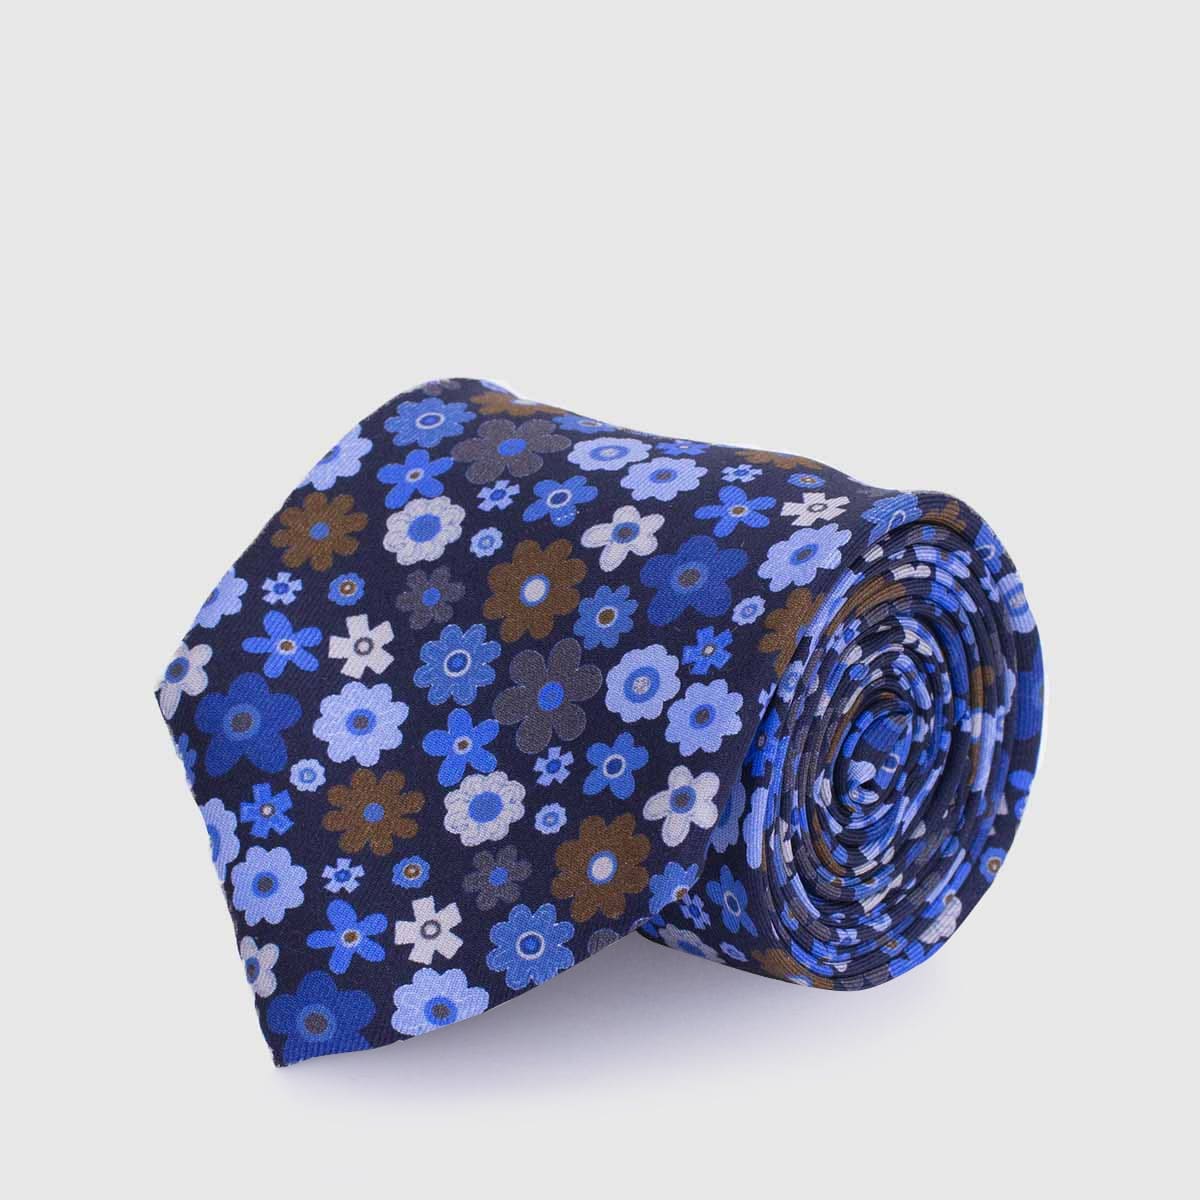 100% 5 Fold Silk Tie in a blue background and flowers Fumagalli 1891 on sale 2022 3